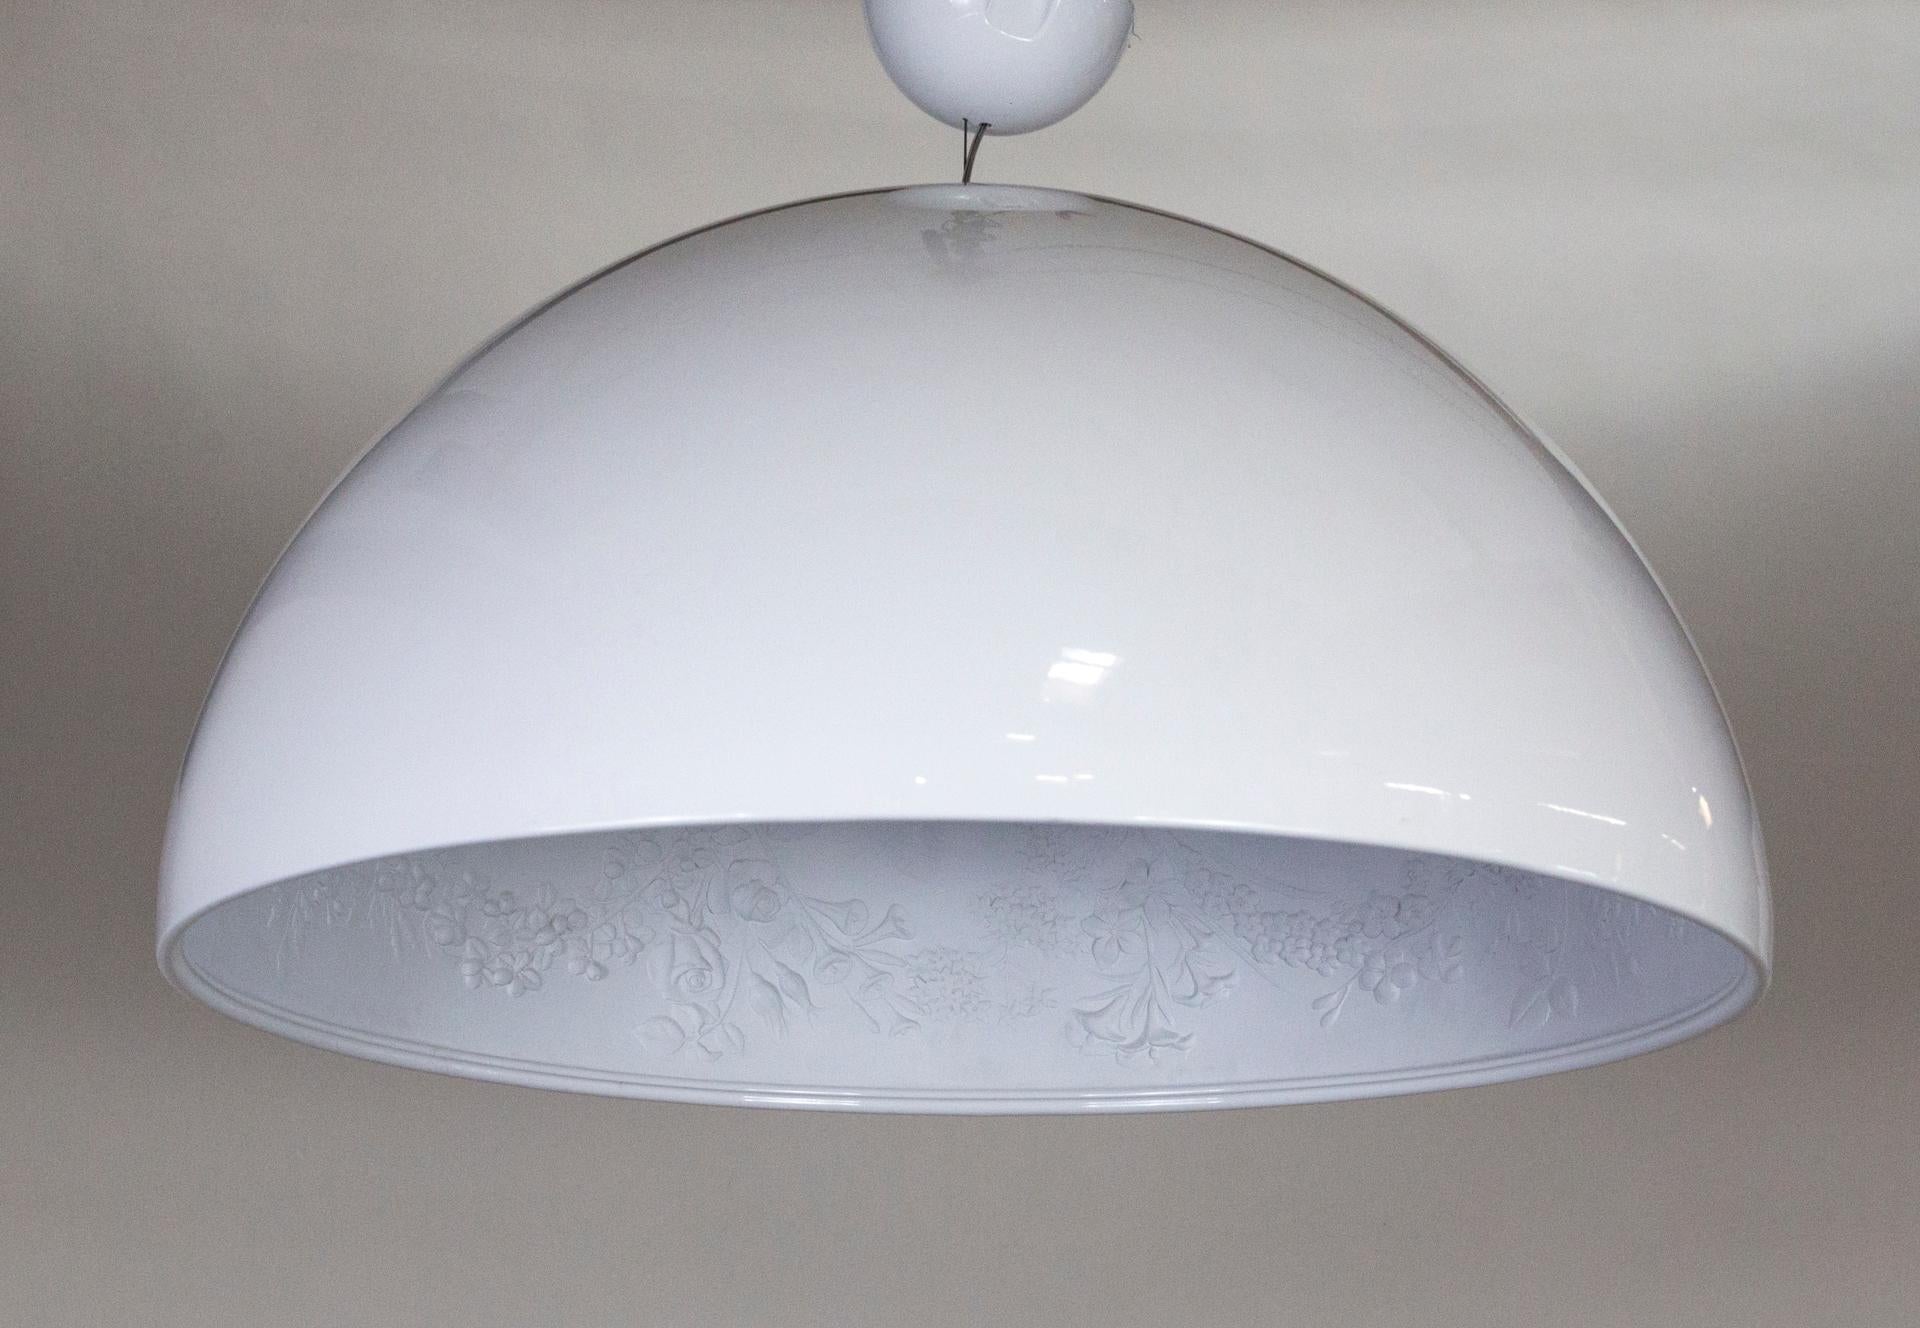 Organic Modern Large White Skygarden Dome Pendant Light by Flos, Marcel Wanders